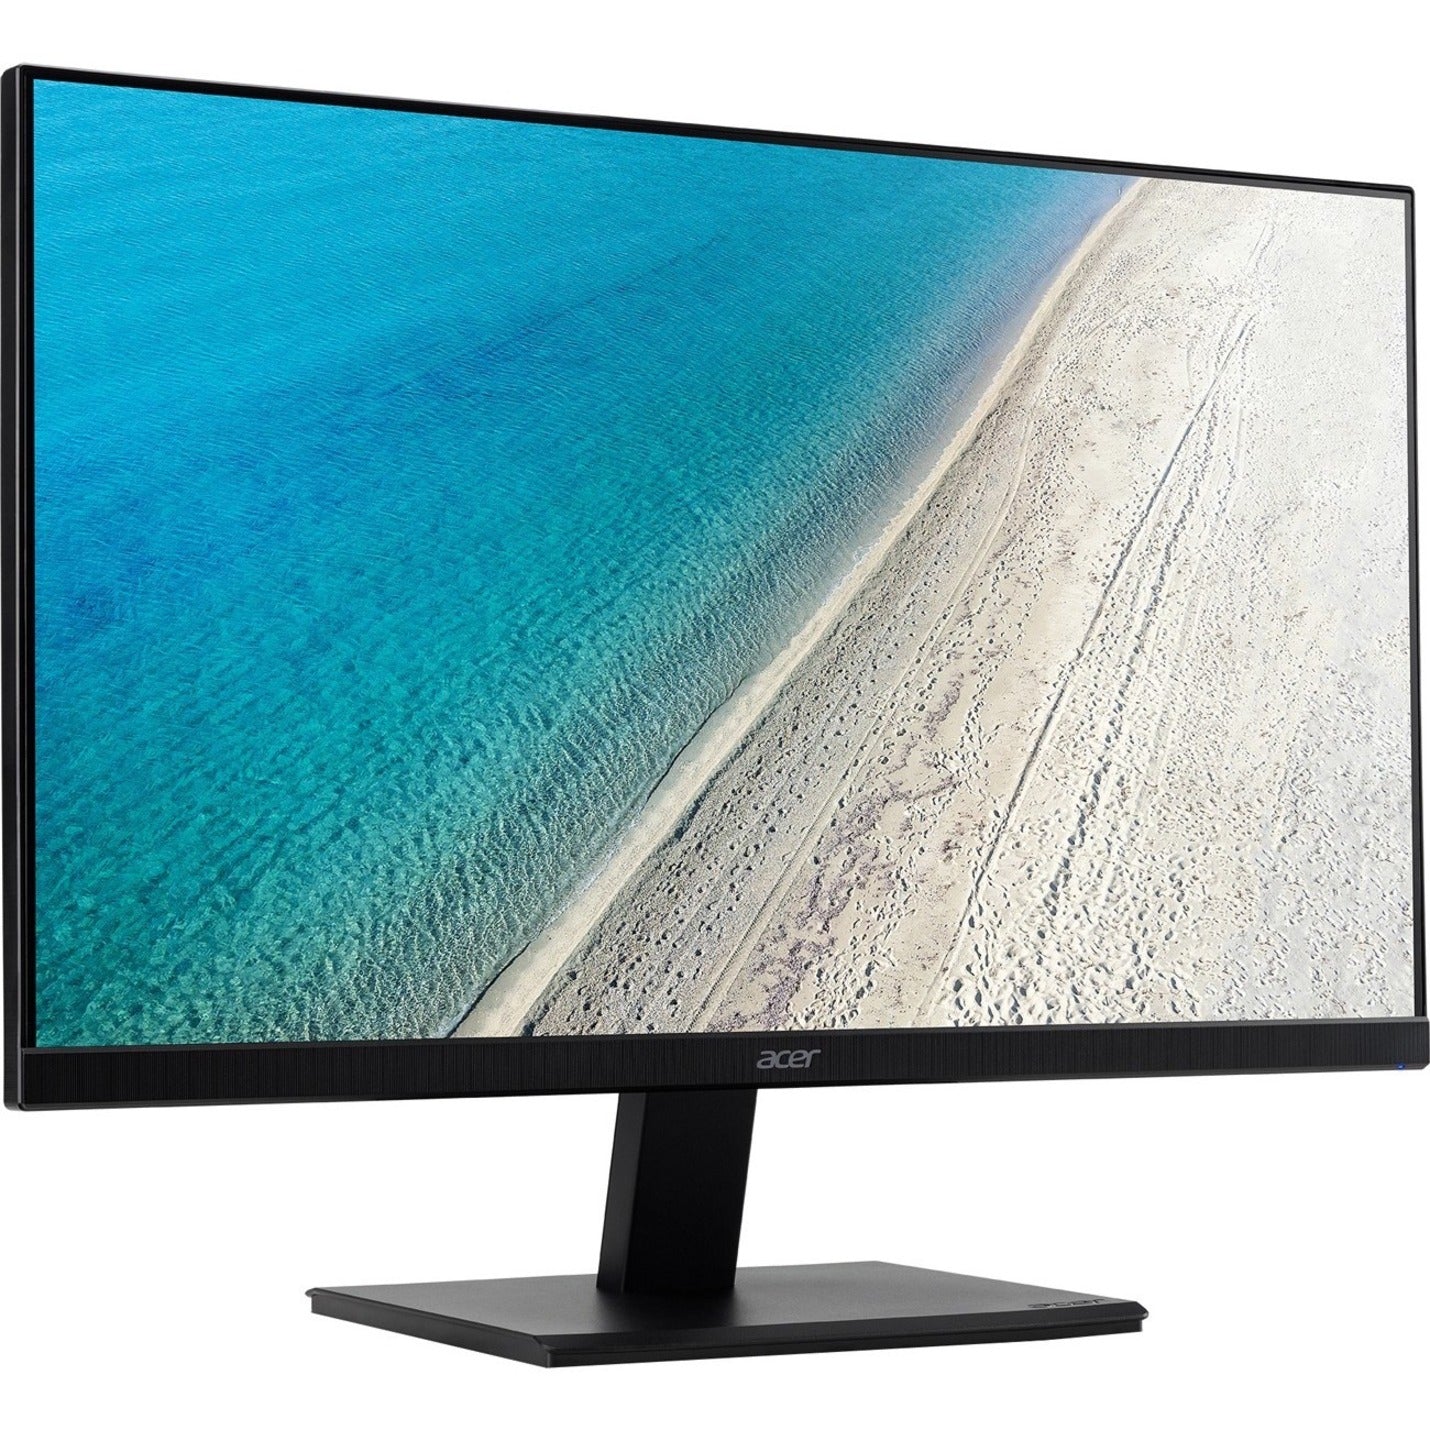 Acer UM.QV7AA.005 V247Y 23.8 Full HD LCD Monitor, Black - Adaptive Sync, TCO Certified